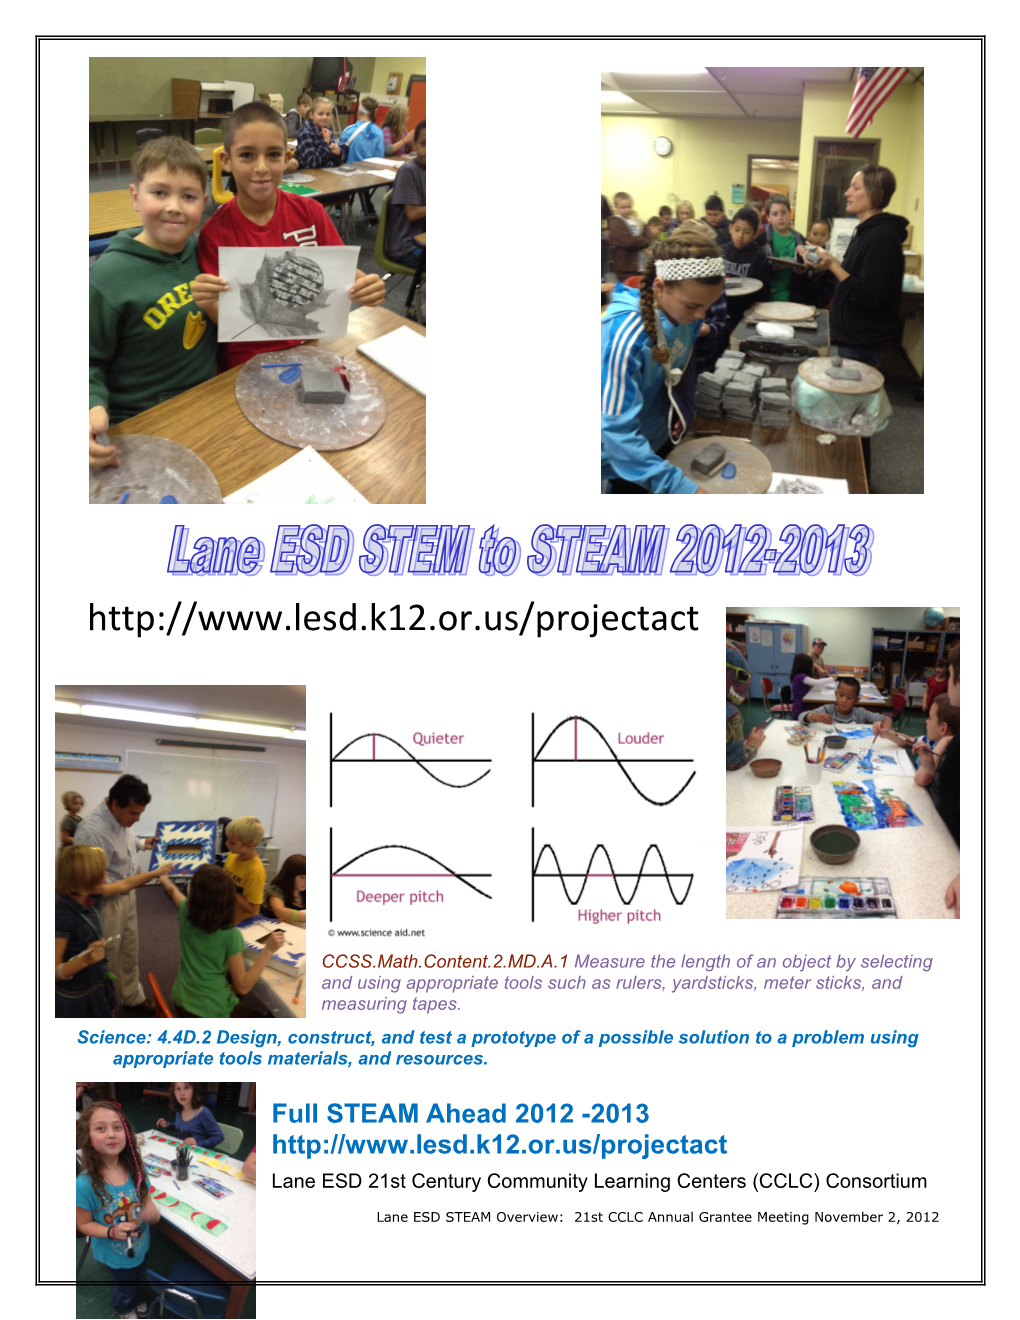 Science: 4.4D.2 Design, Construct, and Test a Prototype of a Possible Solution to a Problem